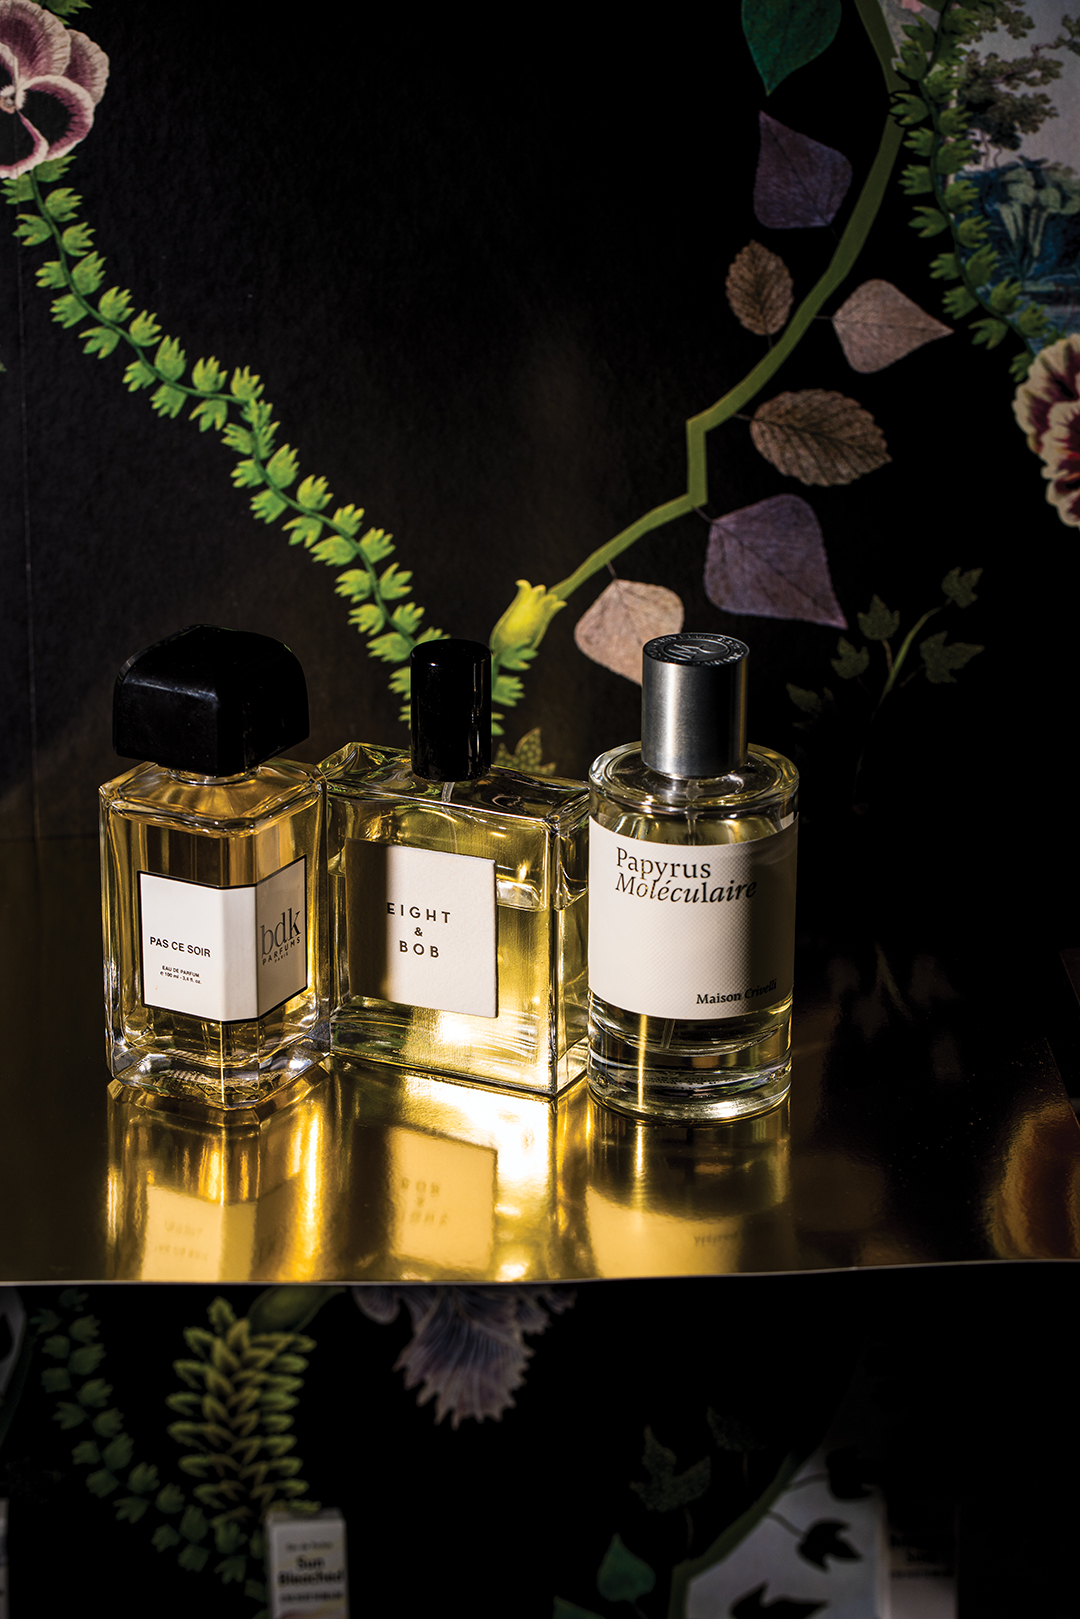 Highcroft also stocks perfumes from Vilhelm Parfumerie, MEMO Paris, Annick Goutal and other lines. 